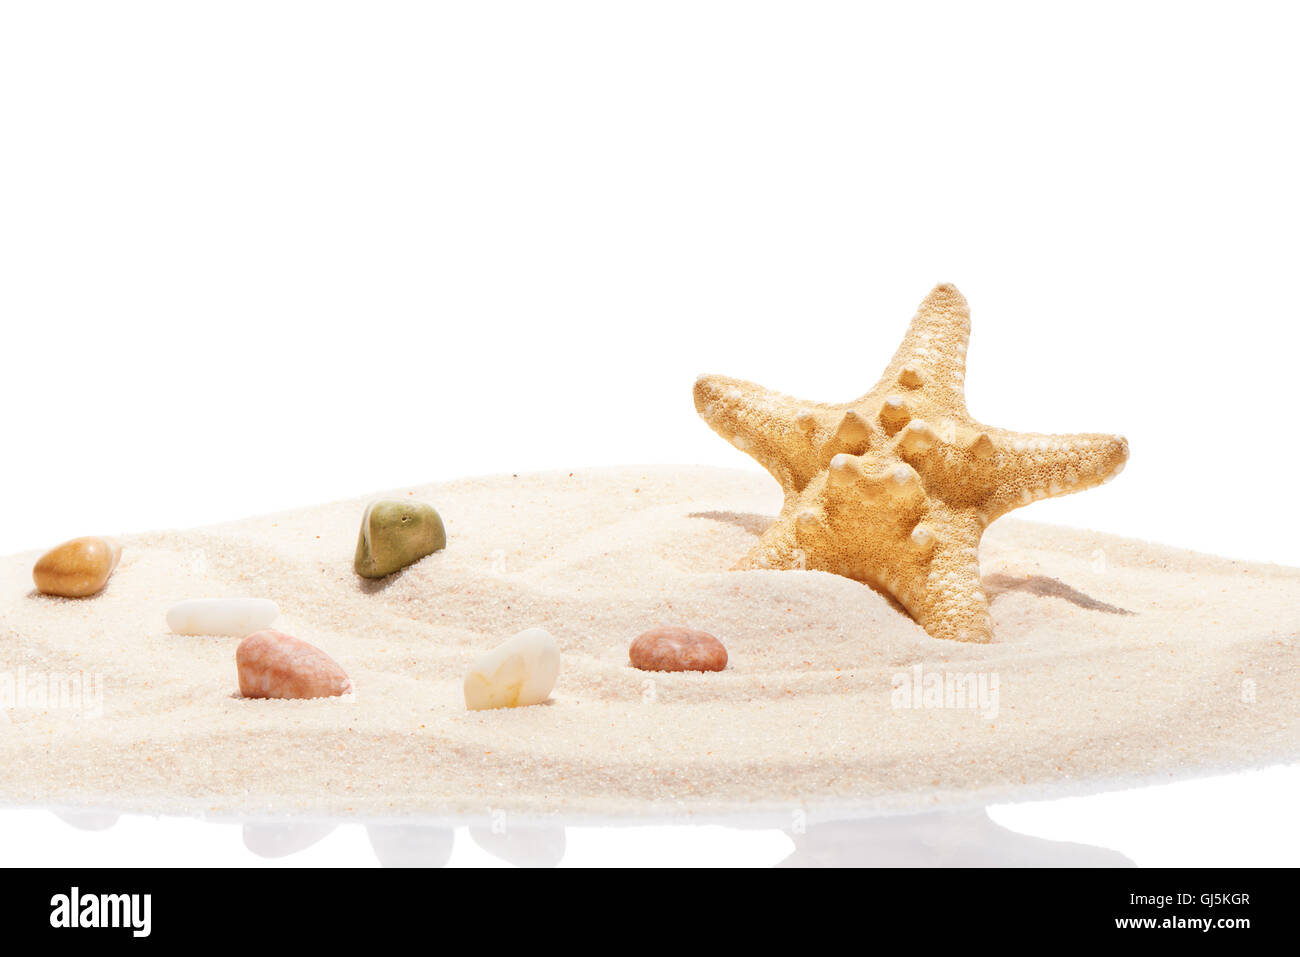 Starfish and sea stones on pile of beach sand isolated on white background Stock Photo